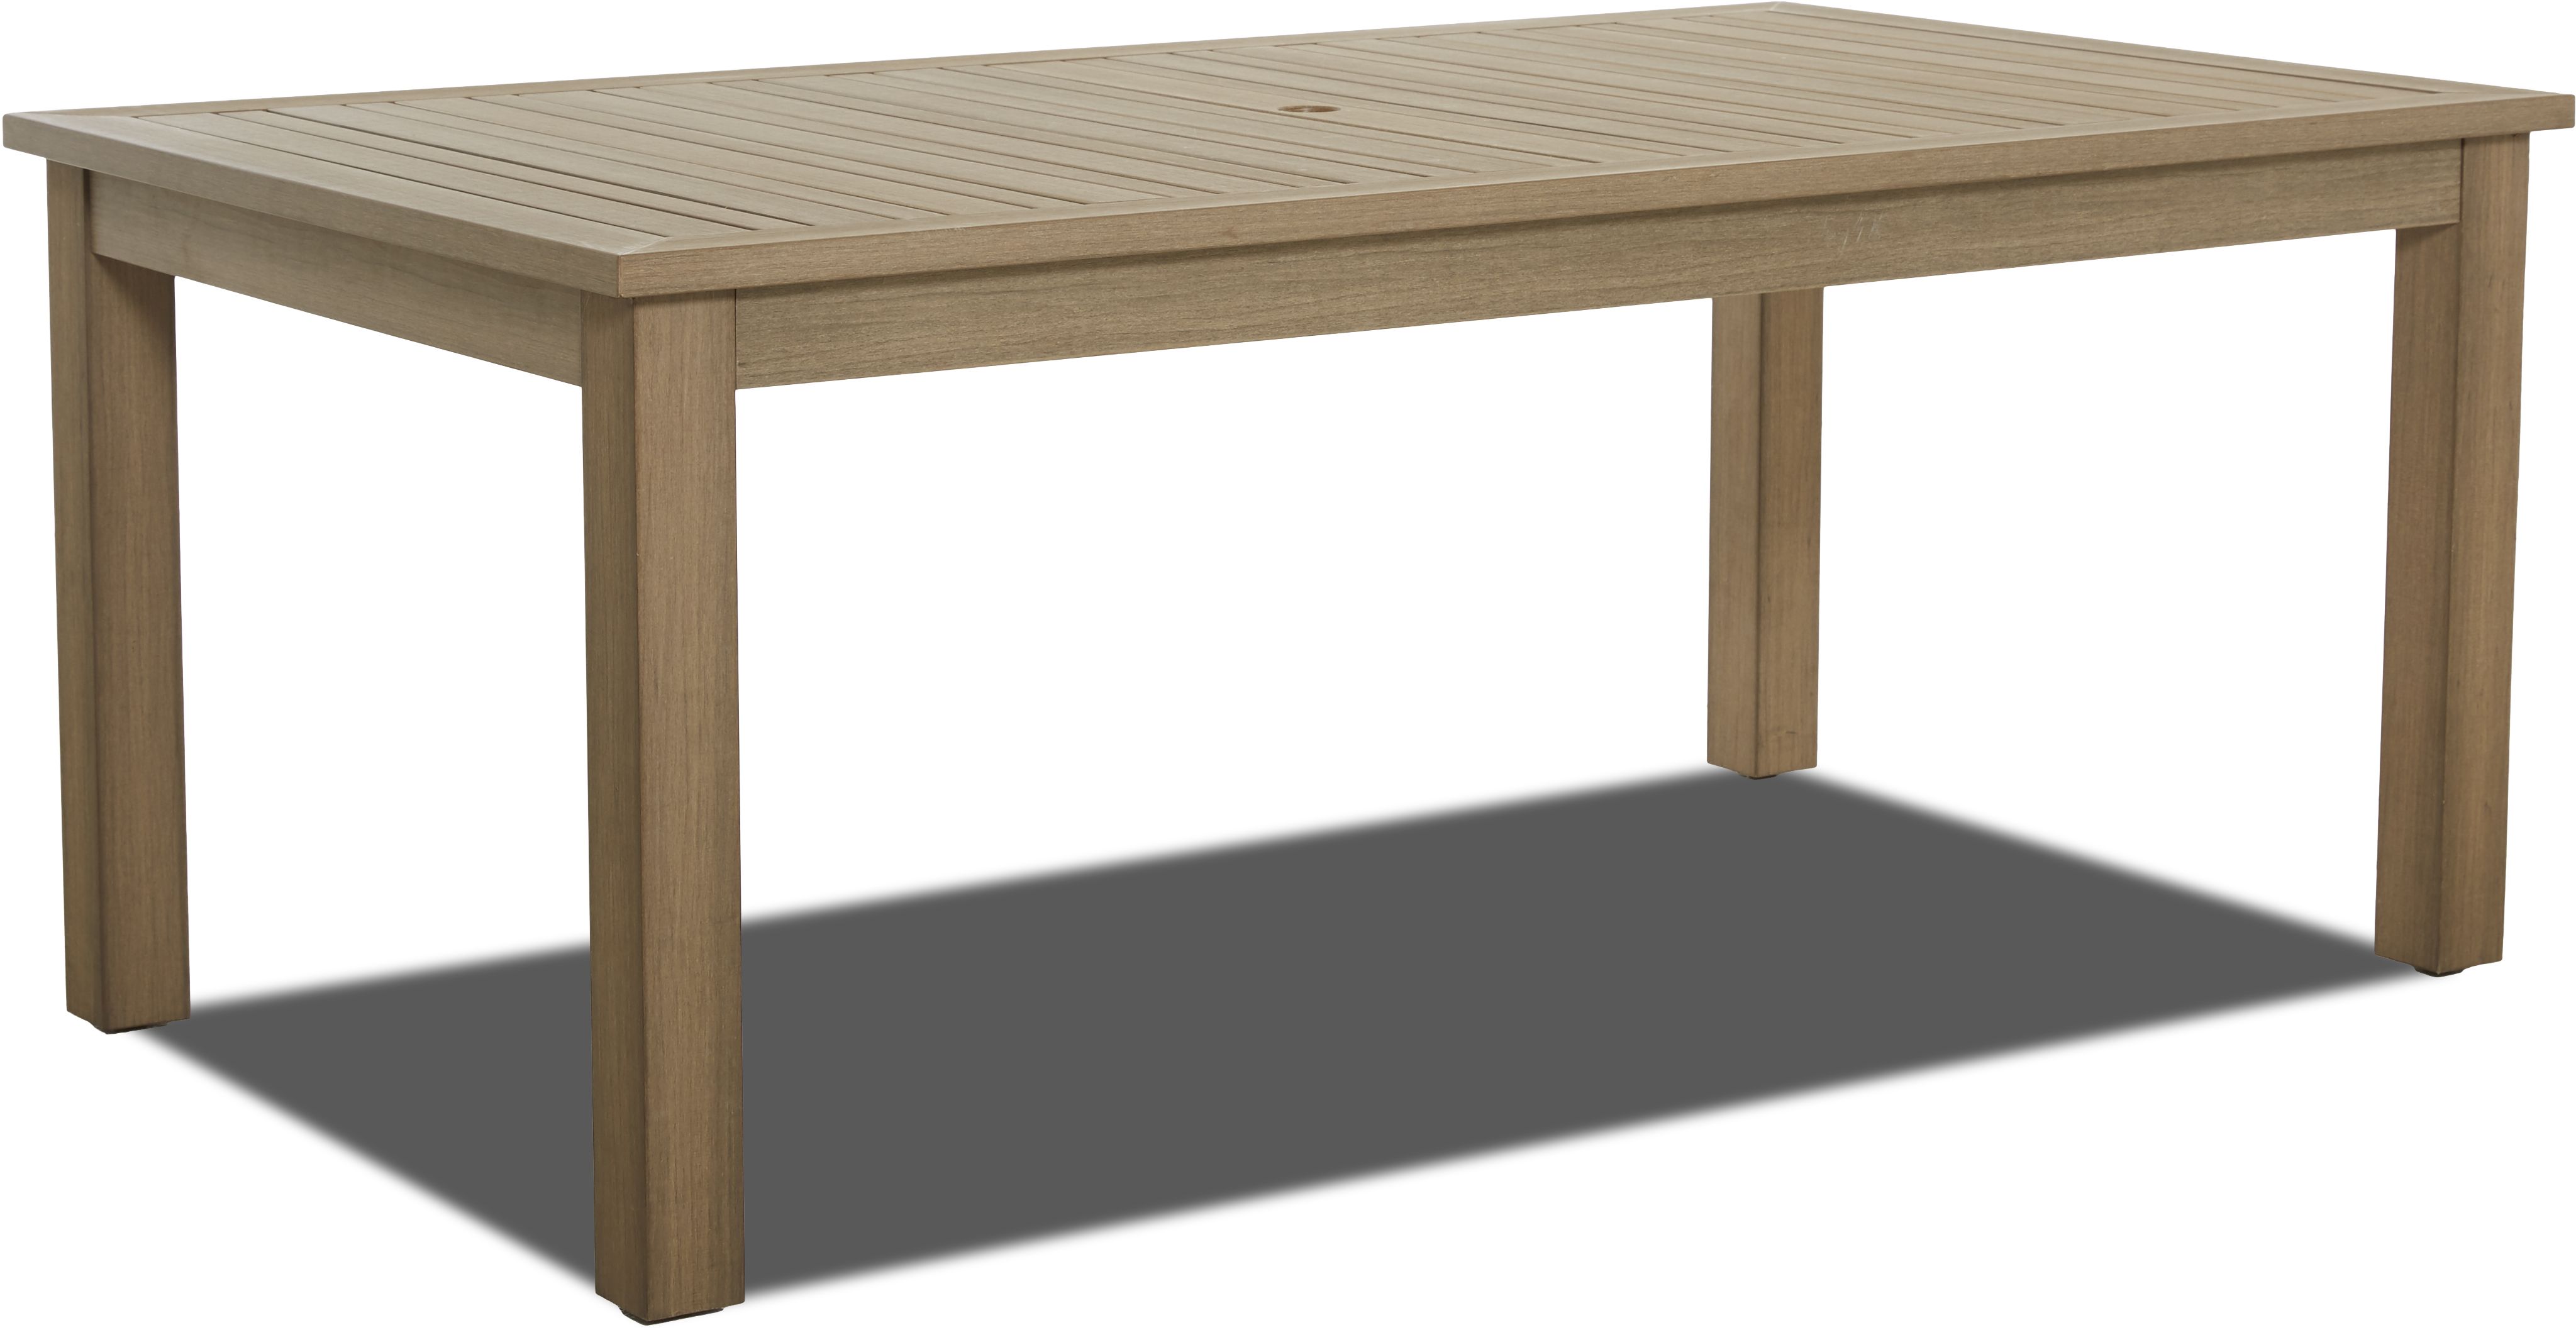 Klaussner® Outdoor Delray 73" Rectangular Dining Table